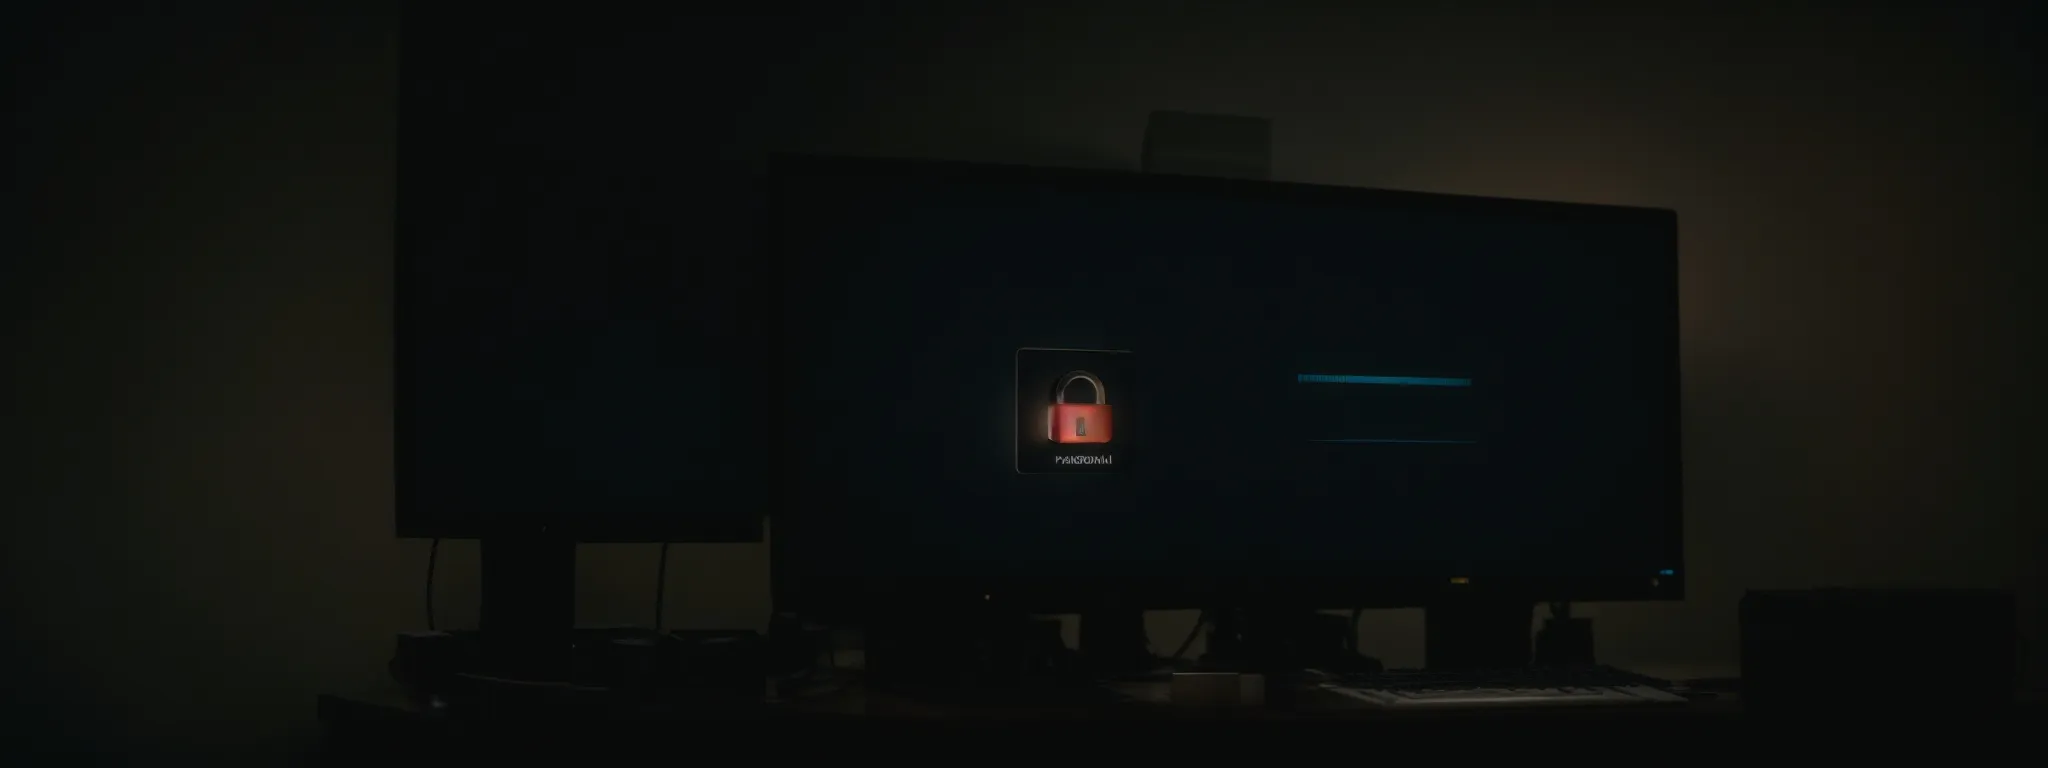 a secure padlock icon illuminated on a computer screen in a dimly lit room with cables and network equipment suggesting a focus on cybersecurity and ssl.